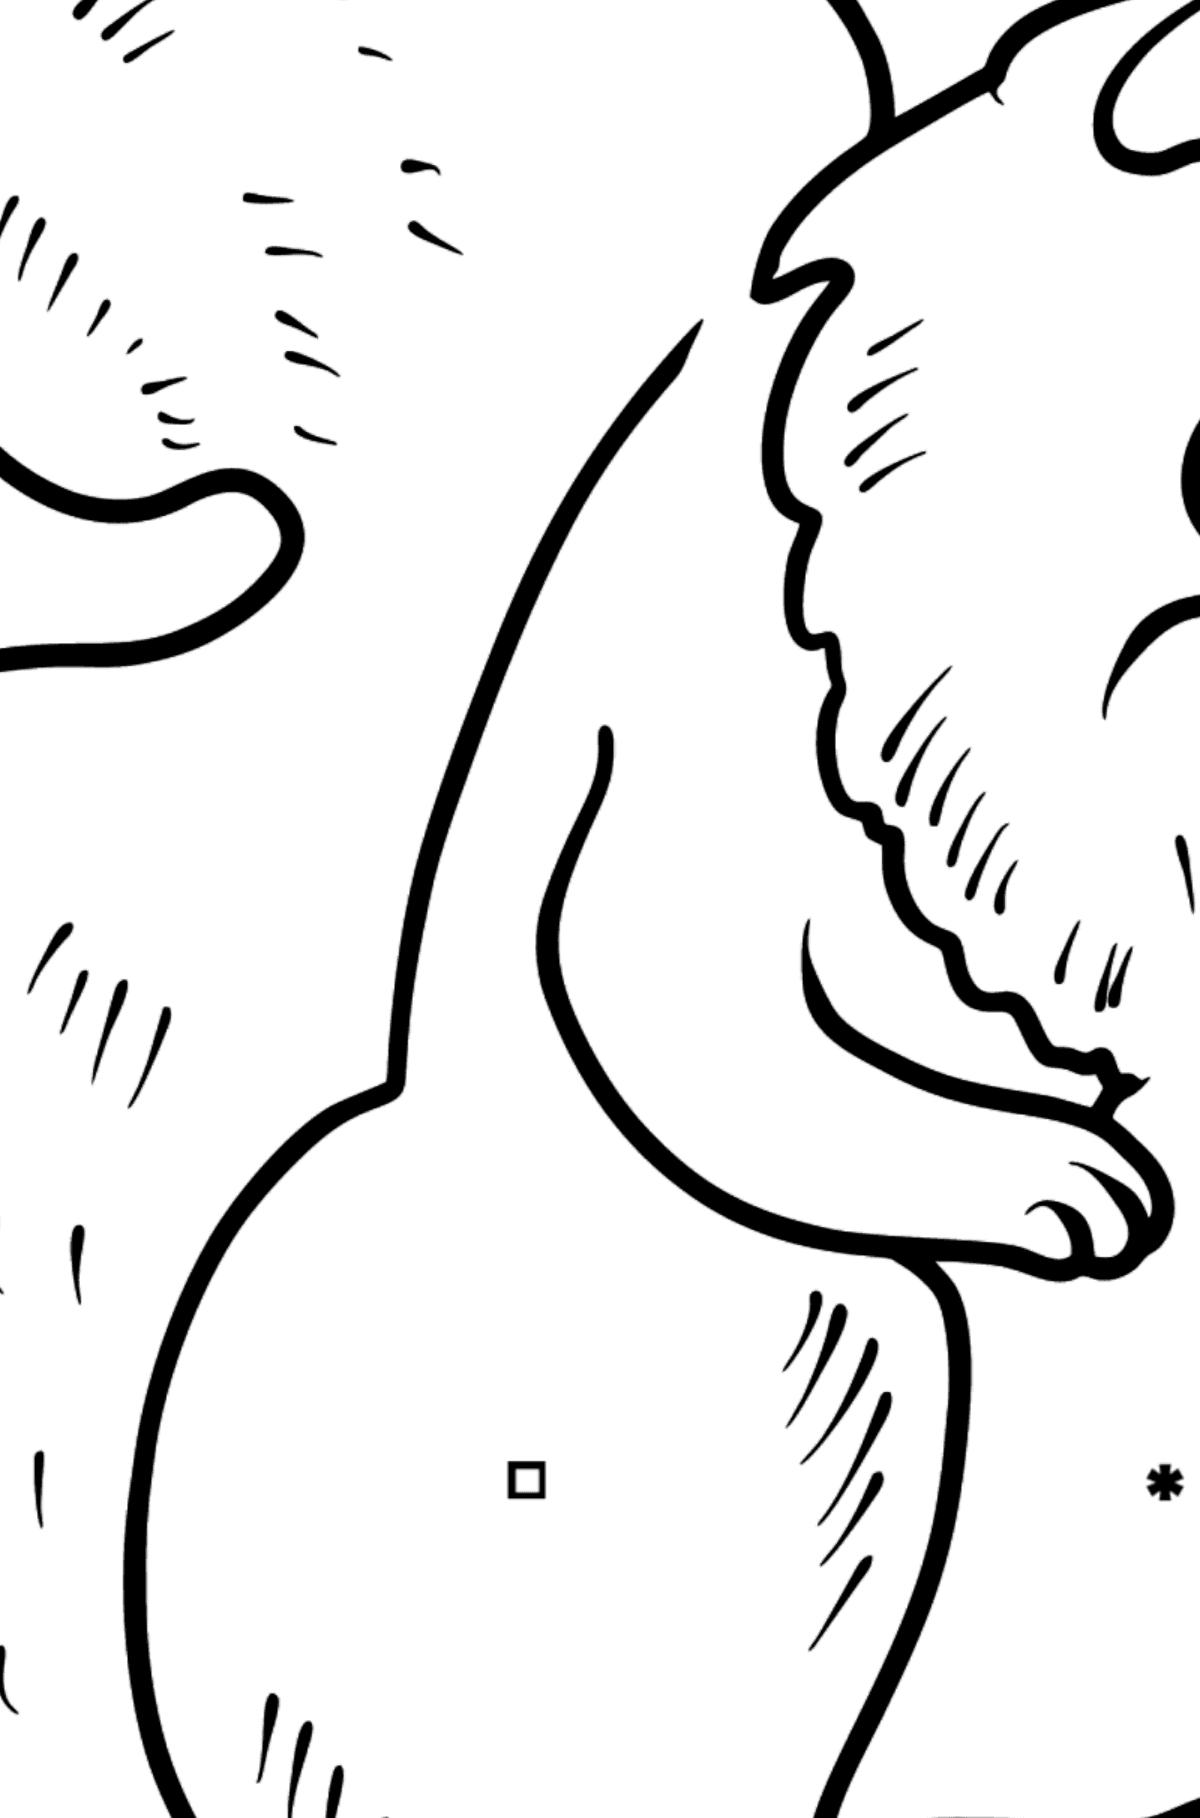 Squirrel coloring page - Coloring by Symbols and Geometric Shapes for Kids